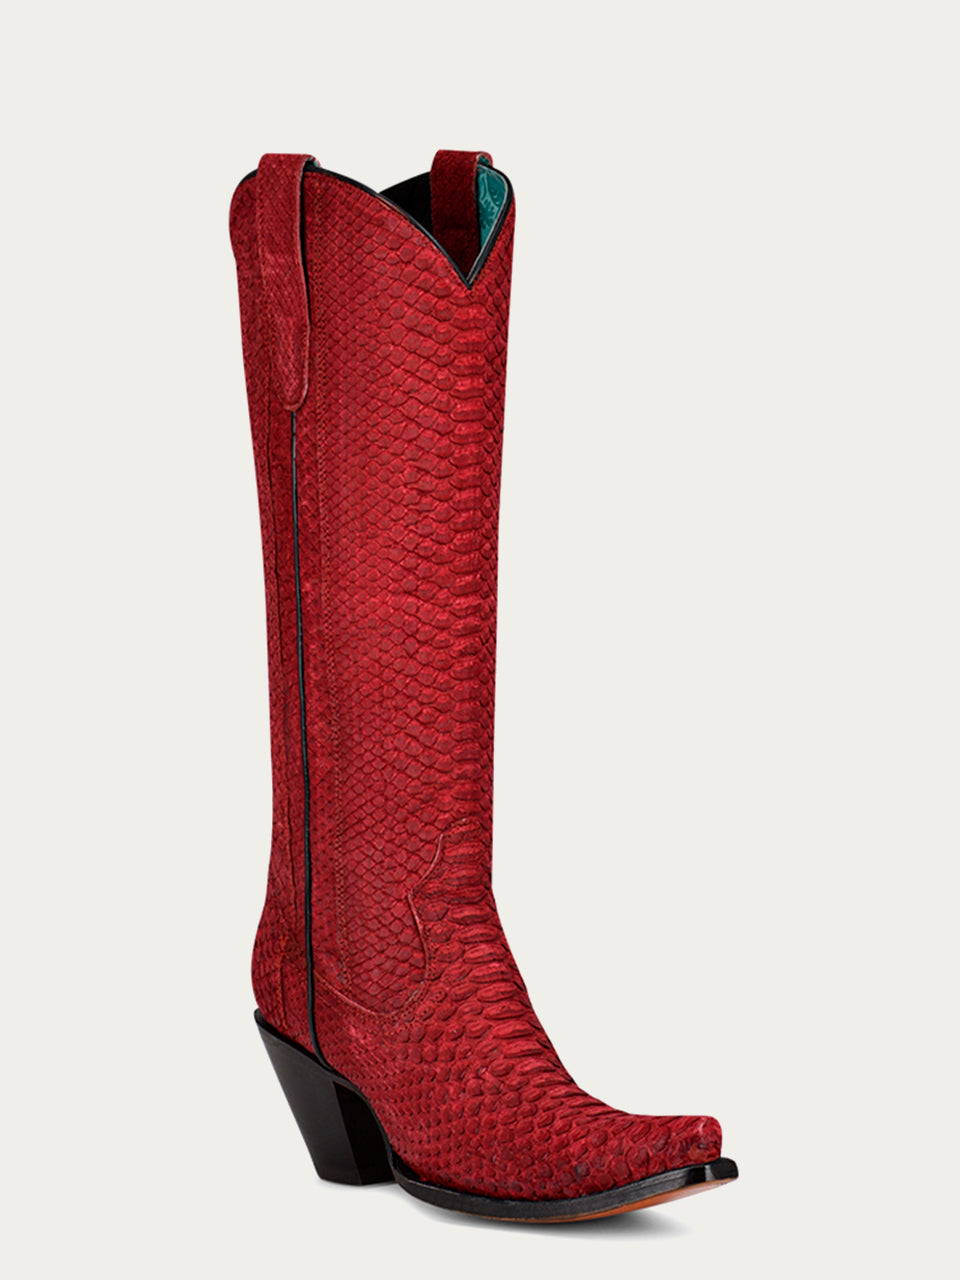 A4194 - WOMEN'S GENUINE RED FULL PYTHON SNIP TOE TALL TOP COWBOY BOOT